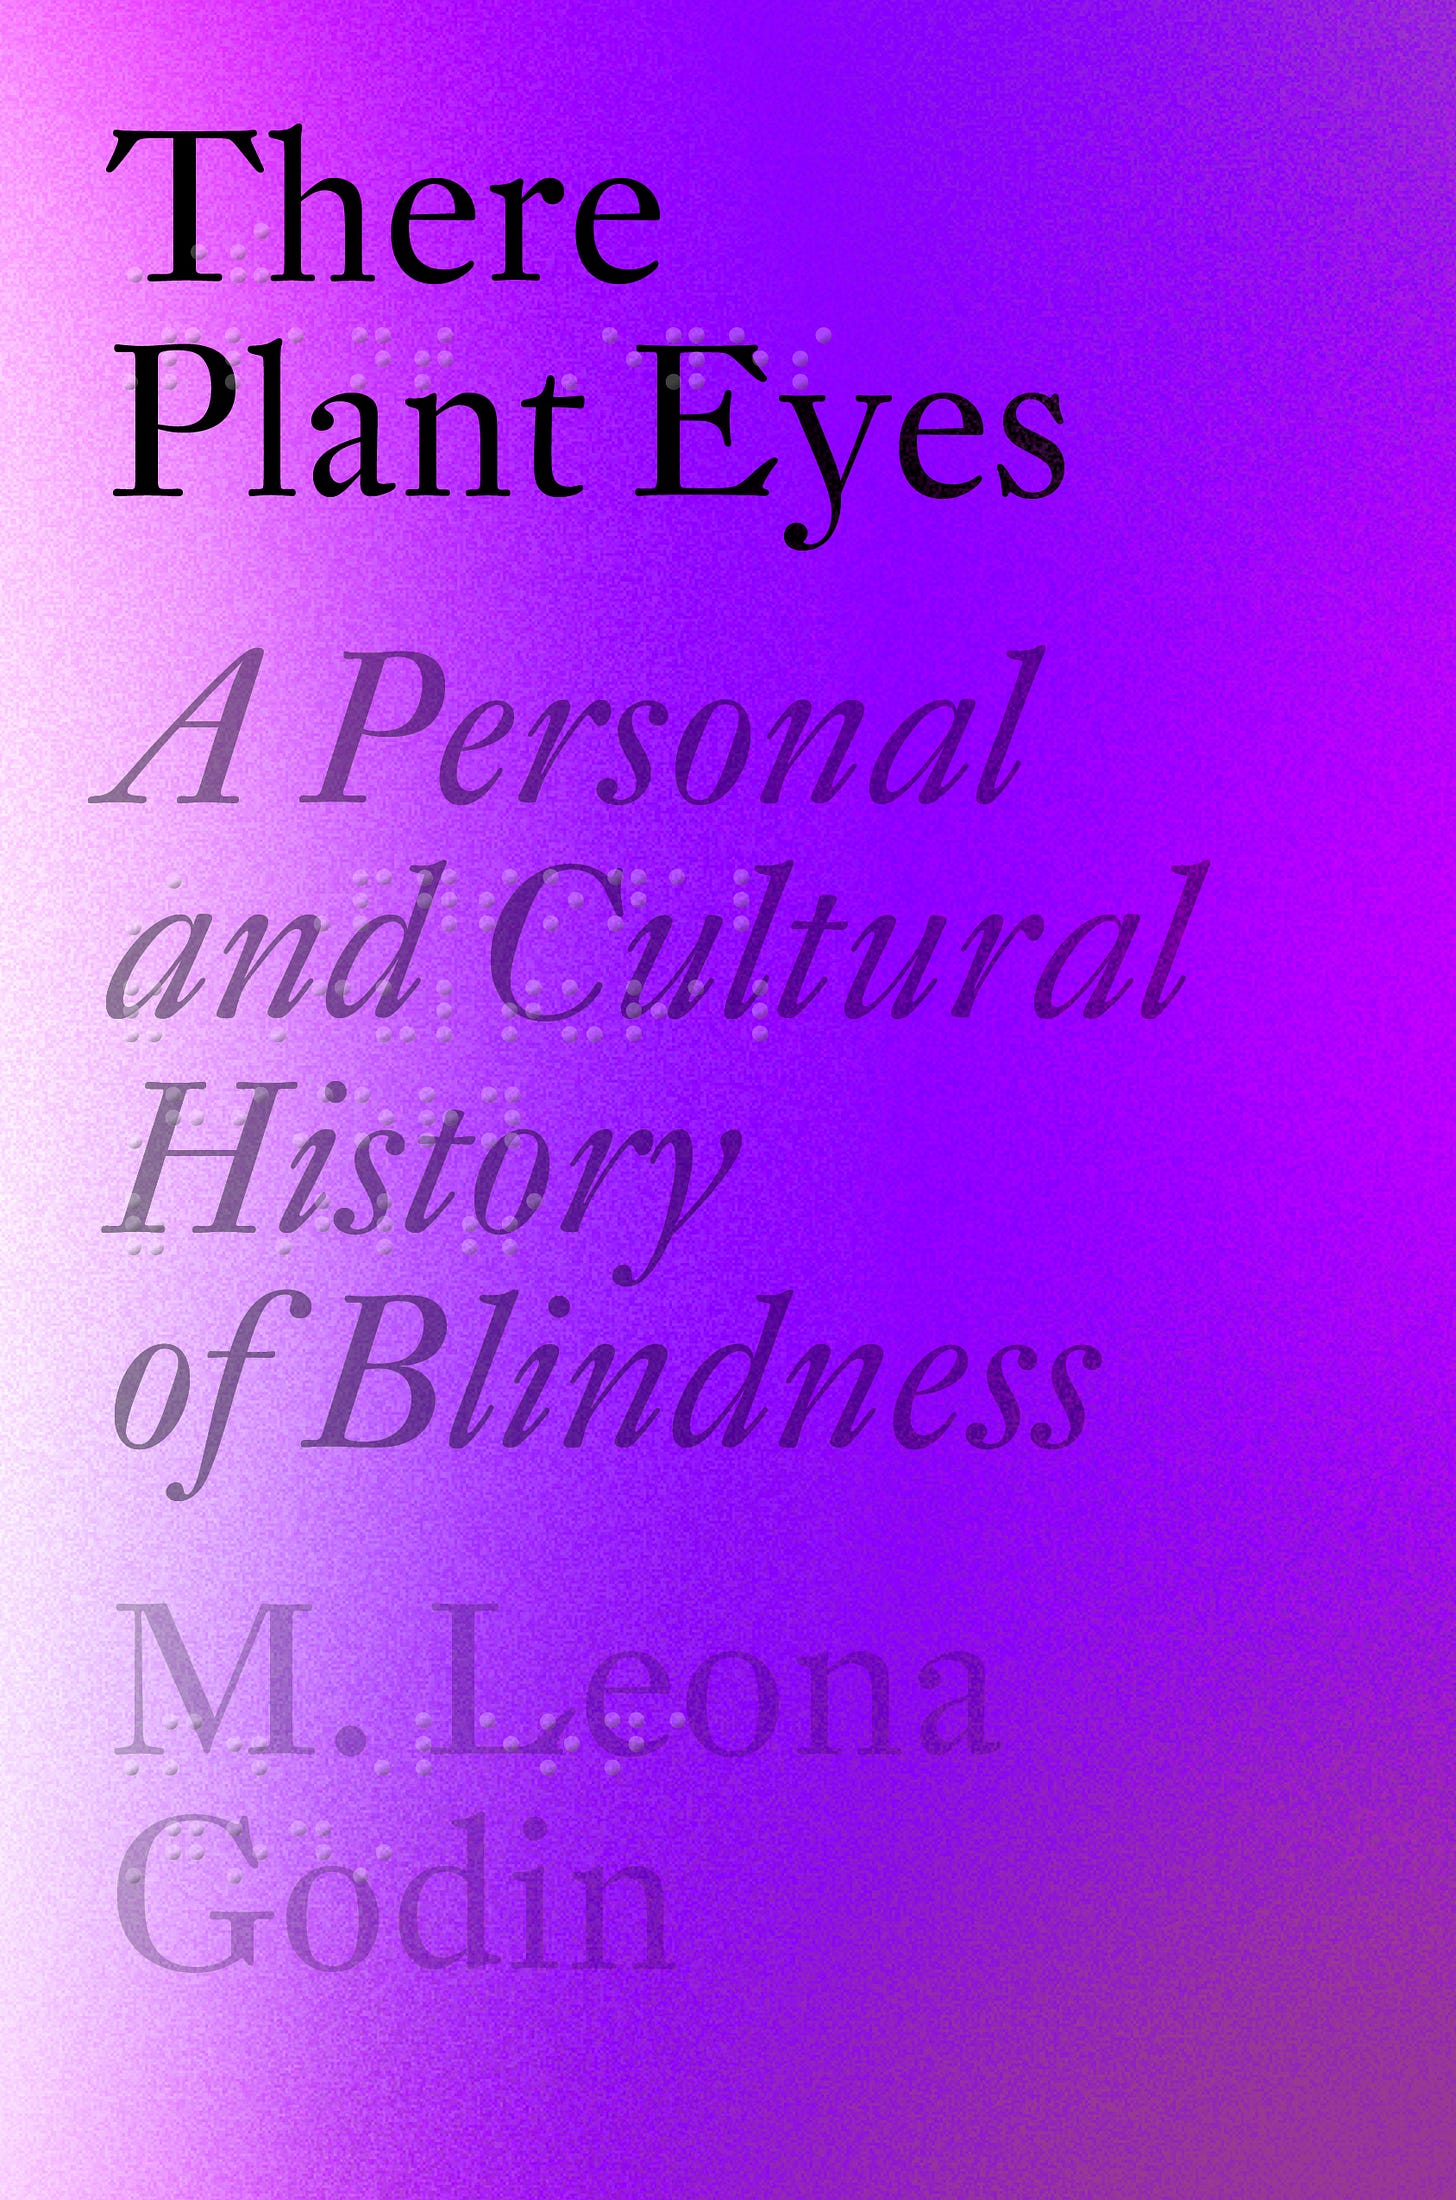 A misty, speckled  spectrum of colors ranging from light grey at the spine to a vibrant violet at center with bright spots towards the outer edge as if a couple spotlights were hitting the deep violet making those places brighter and lighter. The title, There Plant Eyes:A Personal and Cultural History of Blindness, and byline, M. Leona Godin, are large and left  justified with only one or two words running across the cover from left to right and doubled in grade two braille.